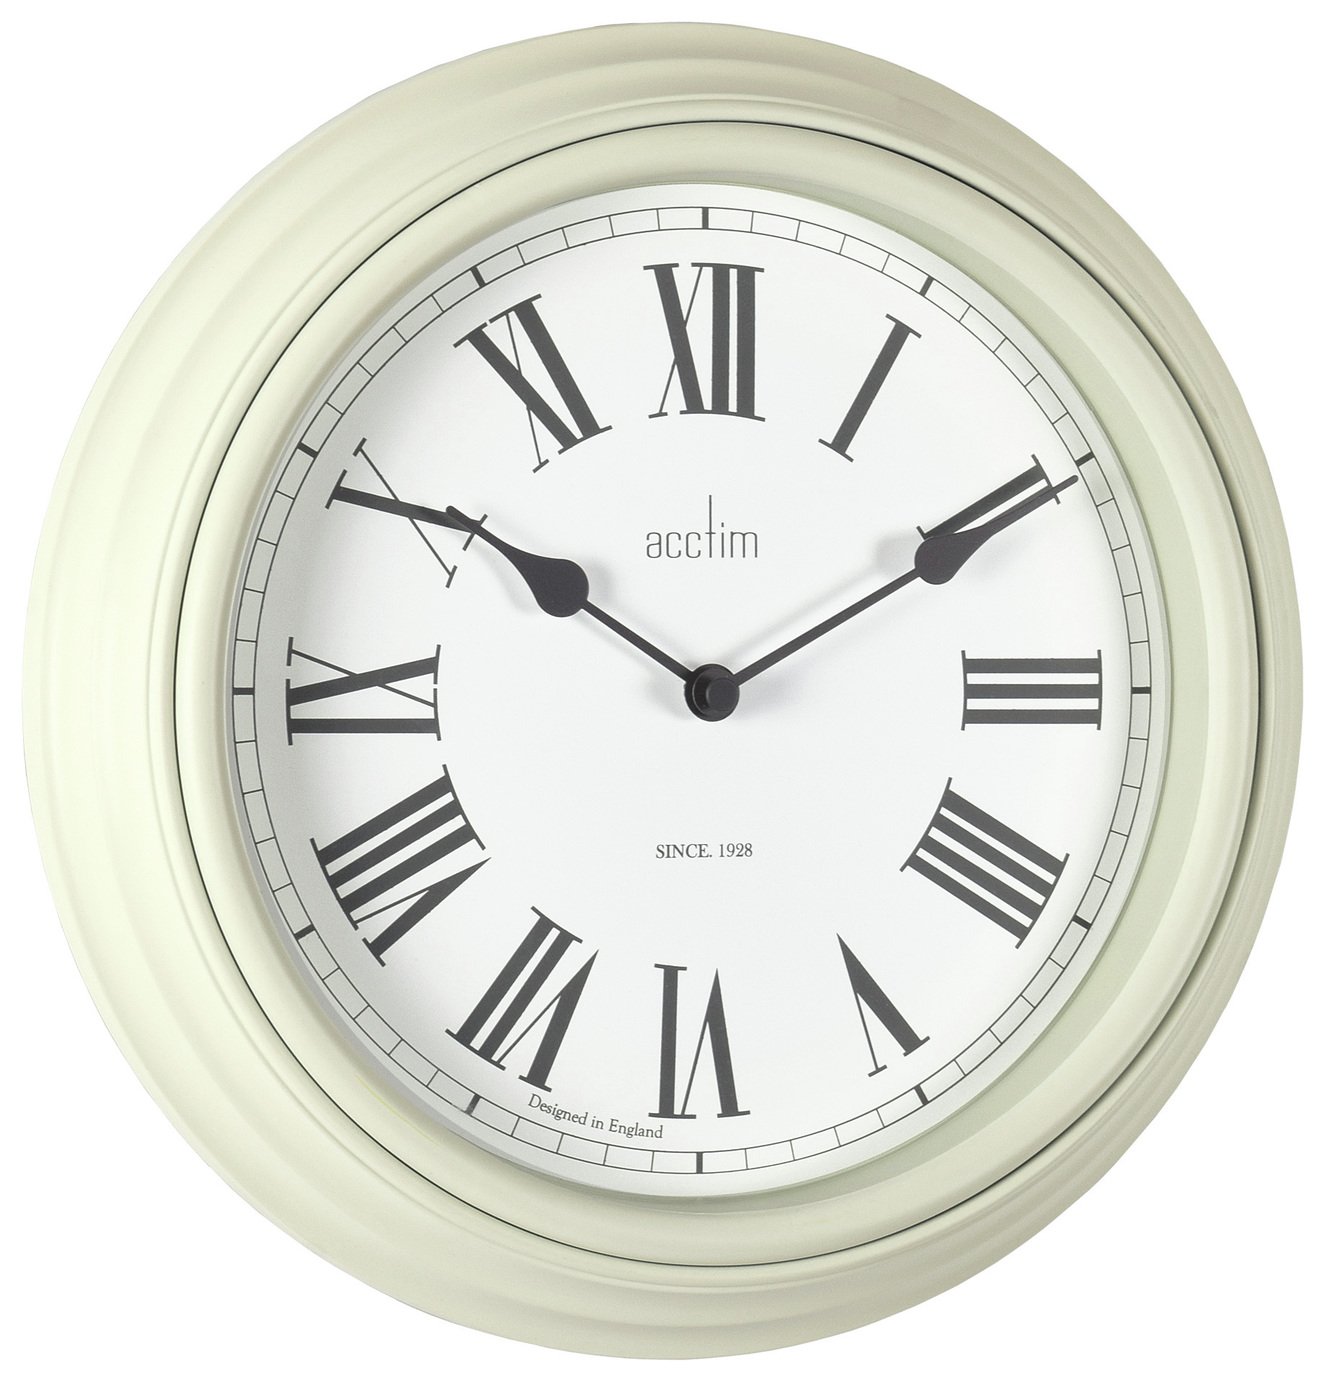 Acctim Vintage Wall Clock Review